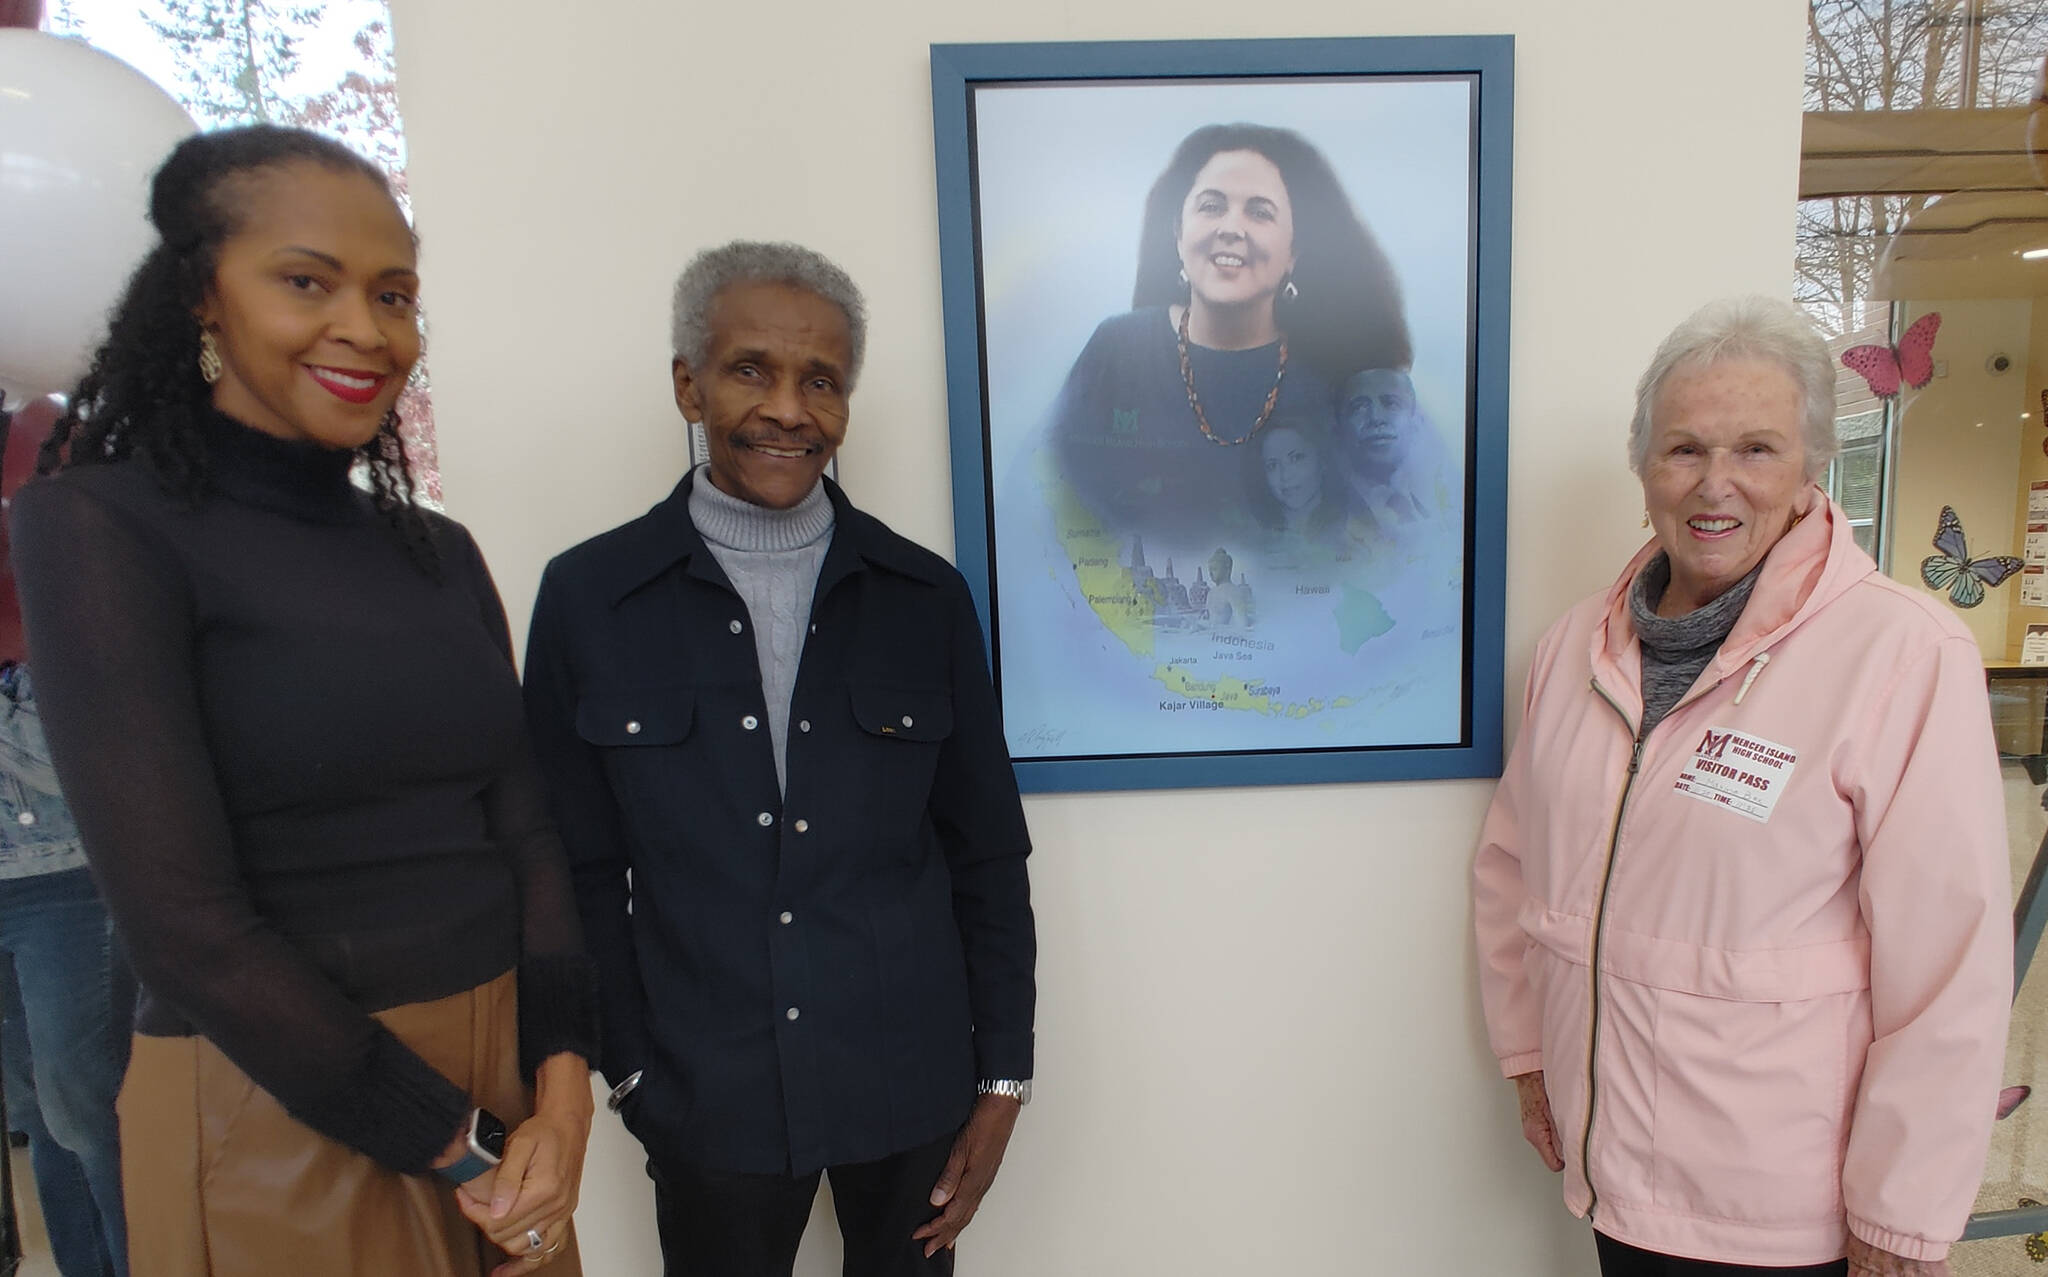 Pictured are Michelle Flowers-Taylor, artist Al Doggett and Maxine Box, Stanley Ann Dunham’s classmate at Mercer Island High School. Doggett’s portrait of Dr. Dunham prominently hangs on a wall in the school foyer. Andy Nystrom/ staff photo